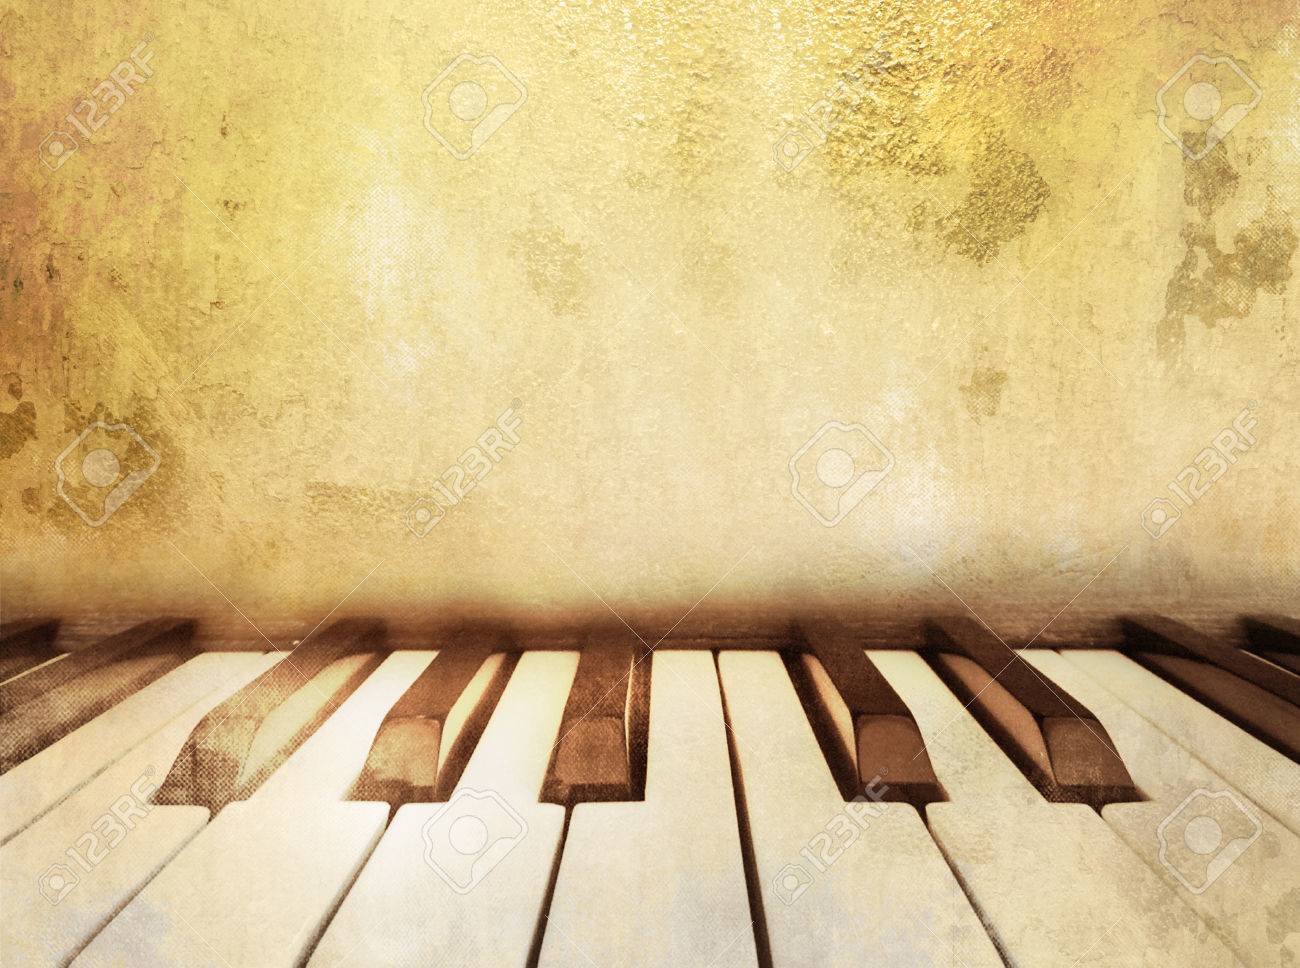 Vintage Music Background With Piano Keys Stock Photo Picture And